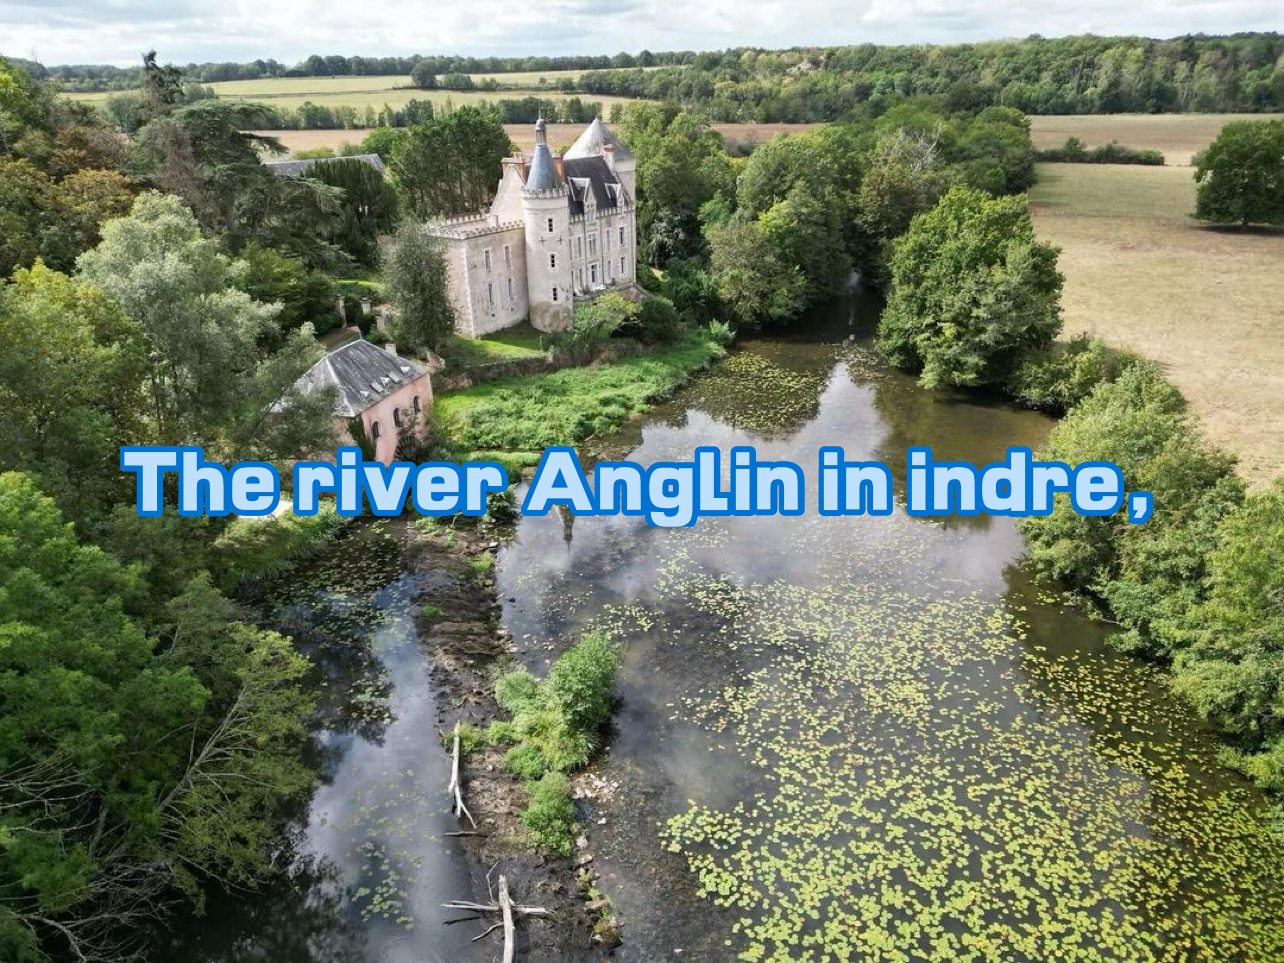 The river Anglin in indre,